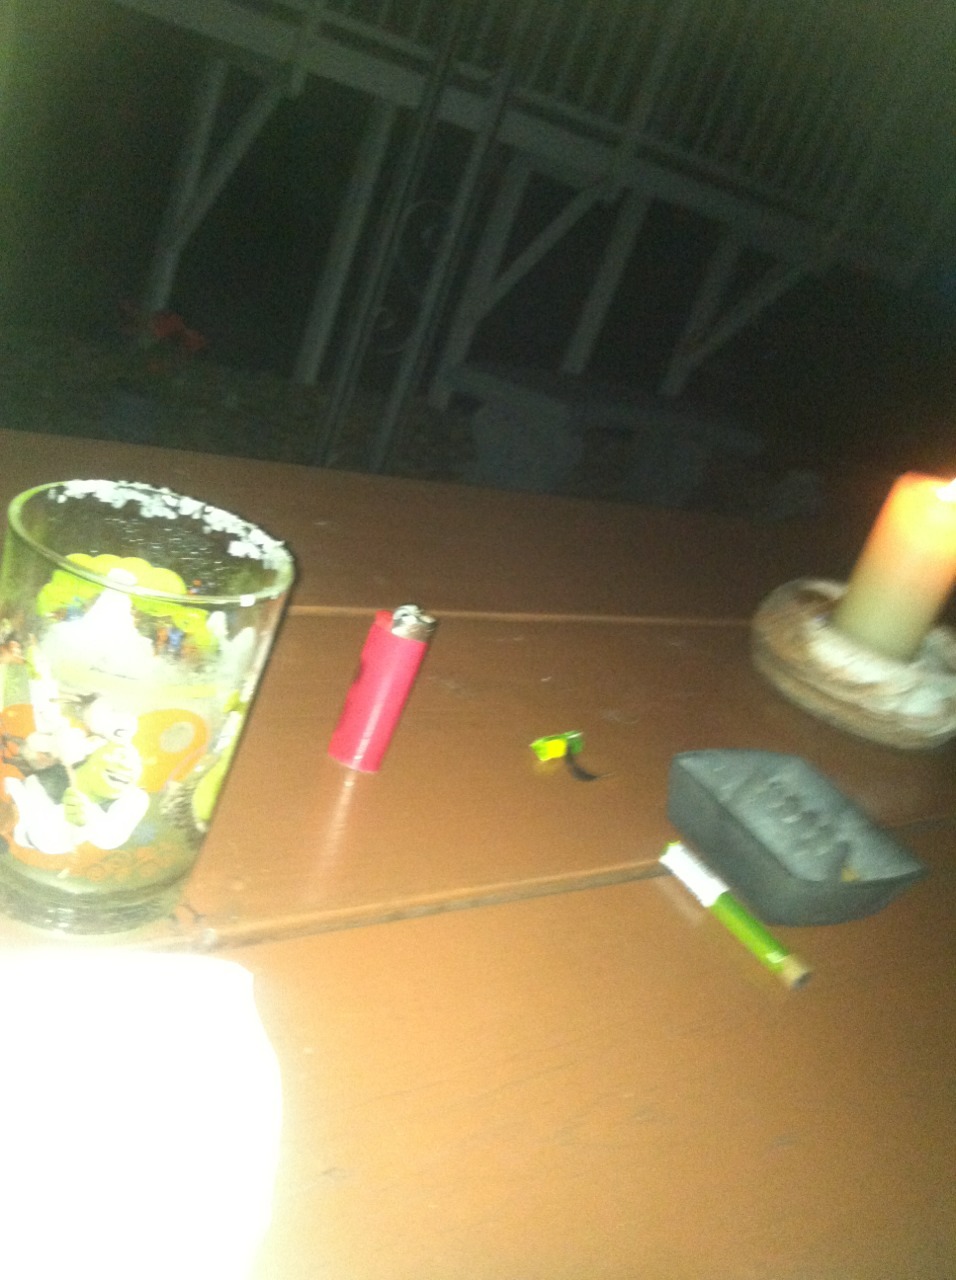 Margarita, Cigar and a Candle W/ some Pandora (Marilyn Manson Station) and Tumblr